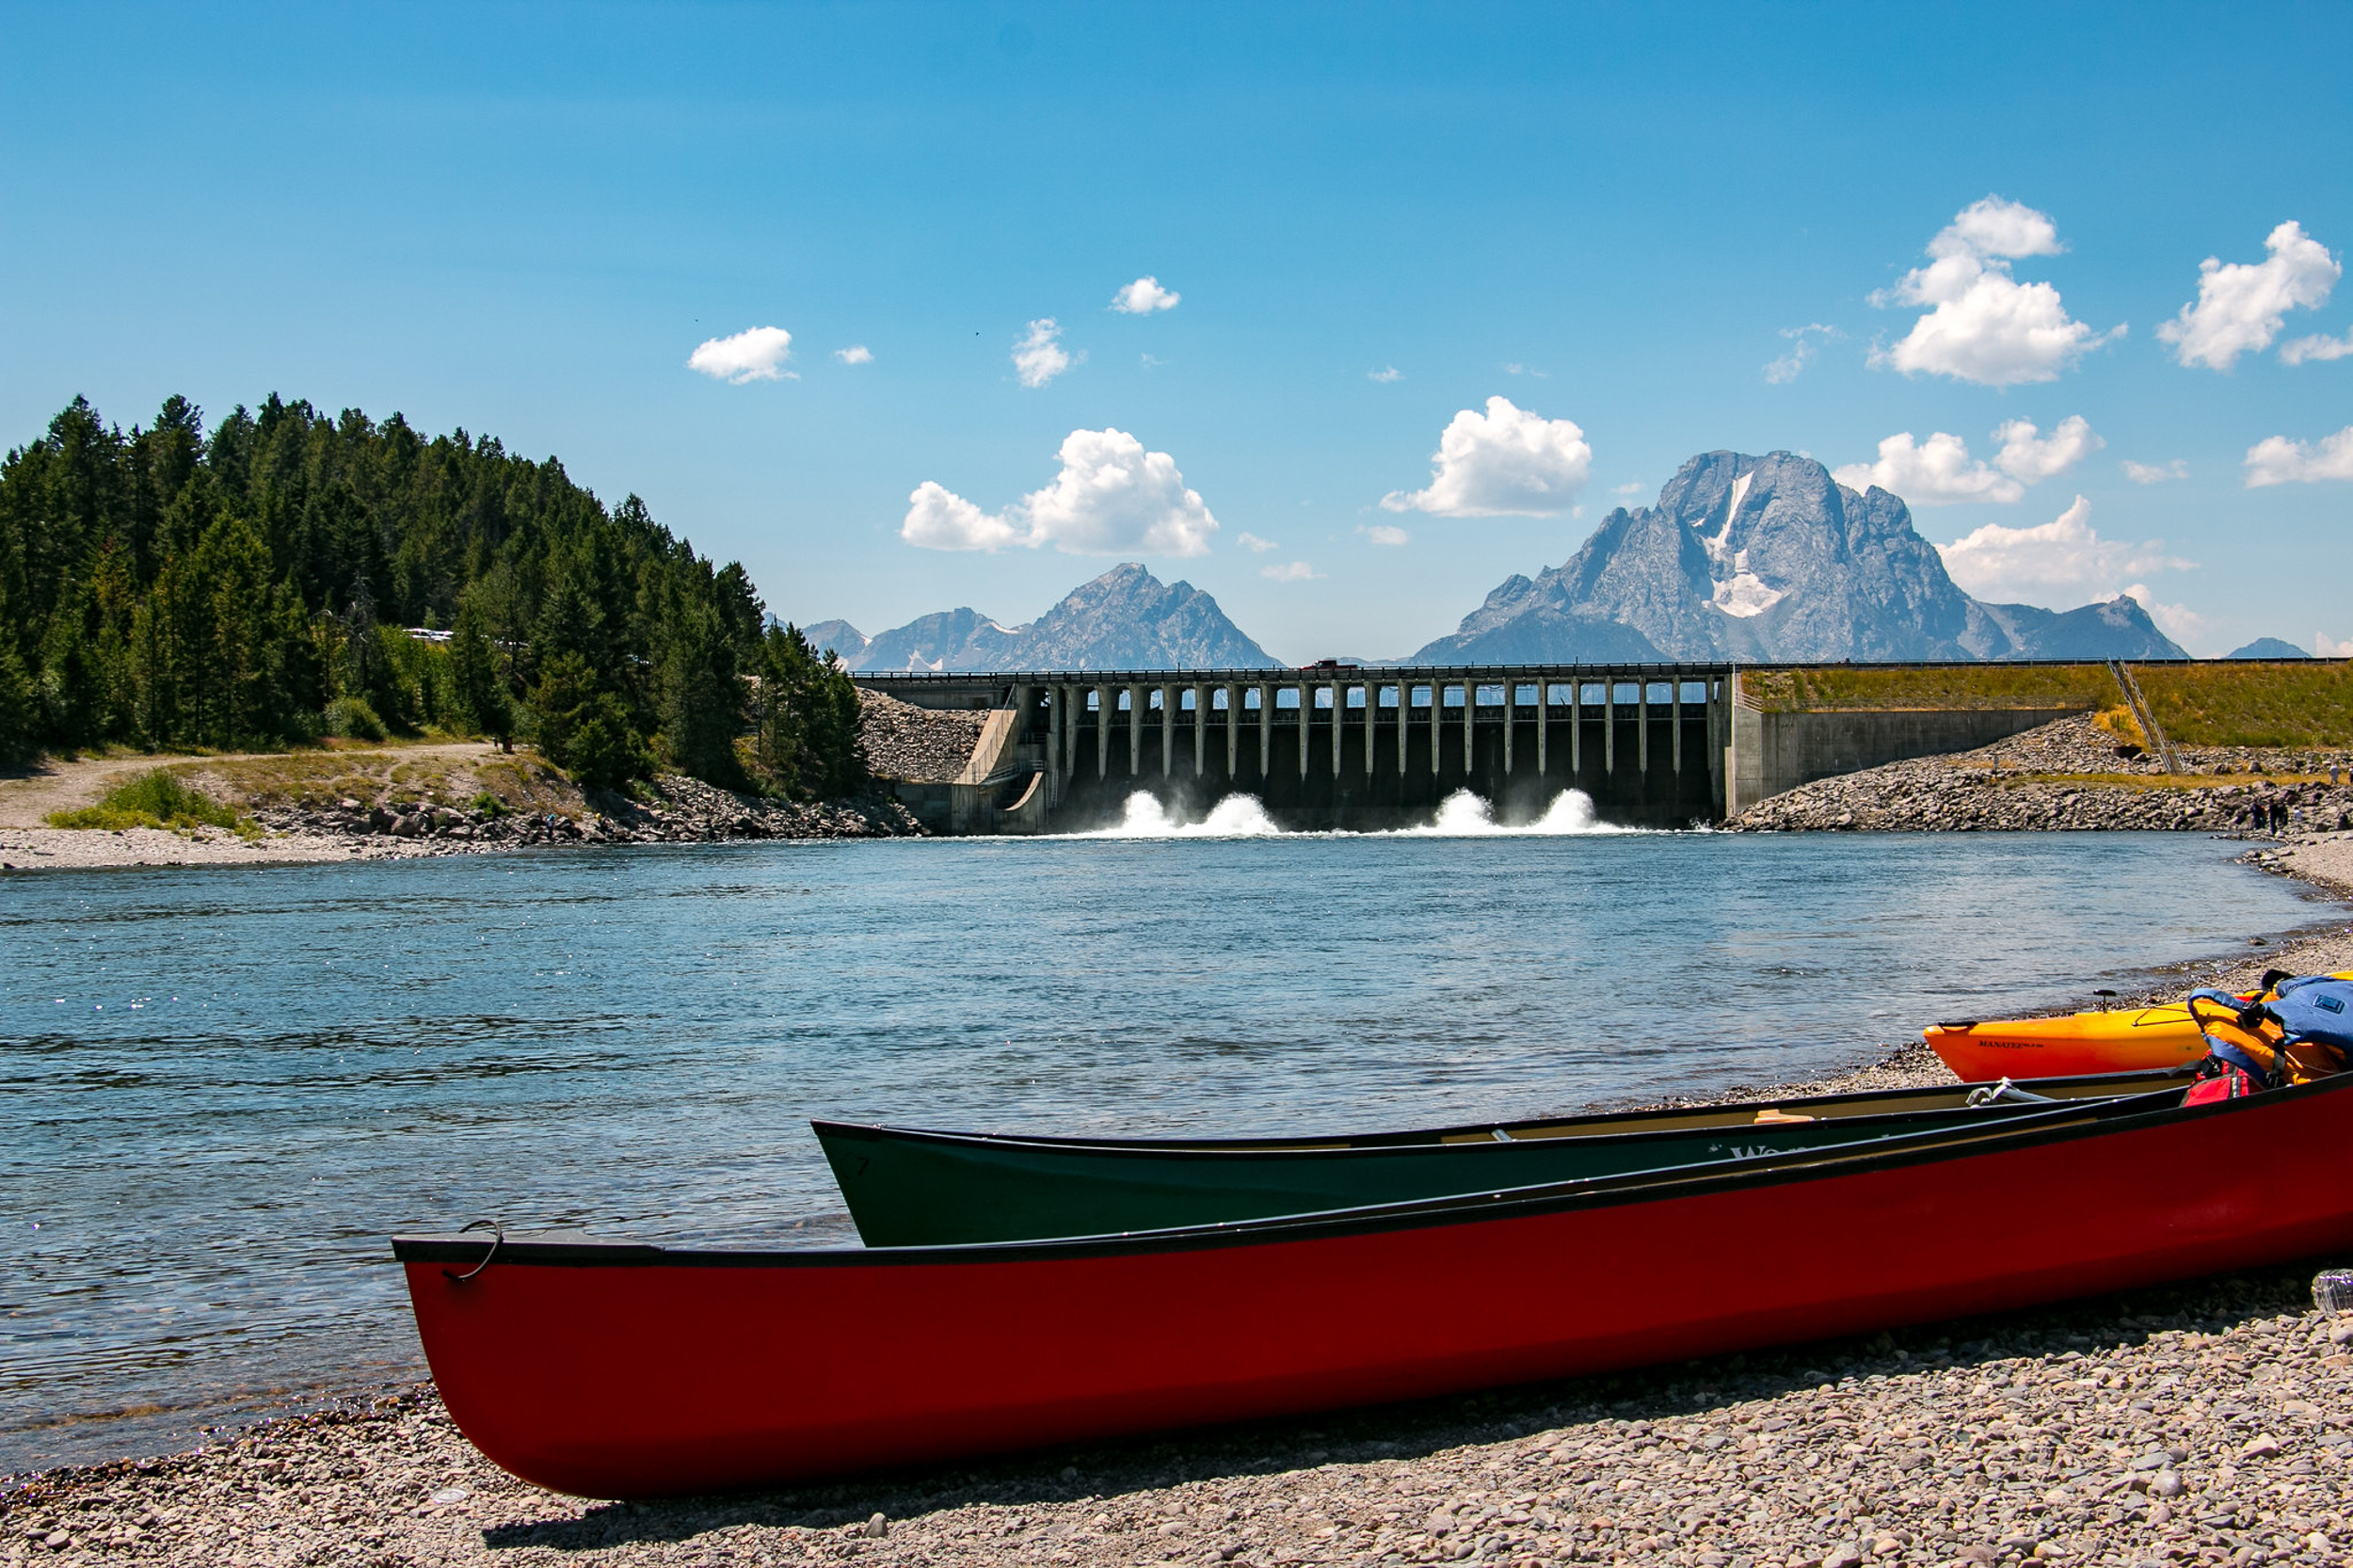 Canoes sit along the shore of the Snake River with the Jackson Lake Dam and Teton Range in the background